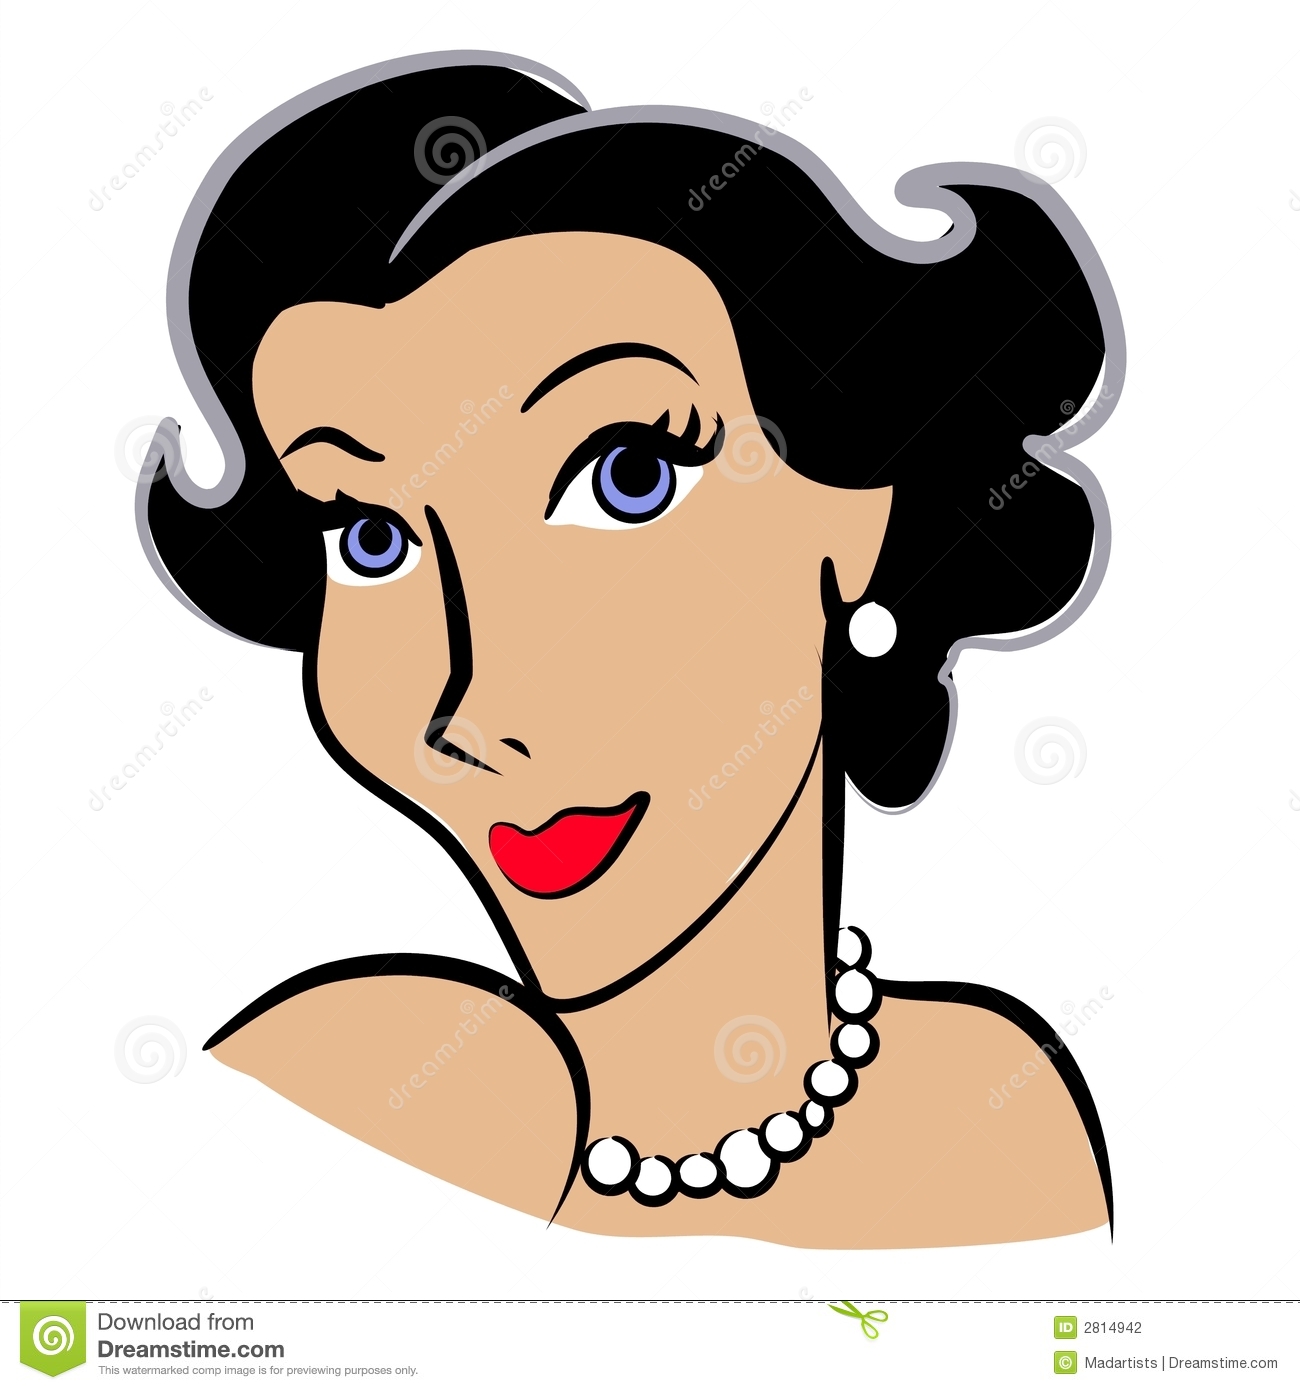 Faces Of Women Clip Art 2 Royalty Free Stock Photography - Image .